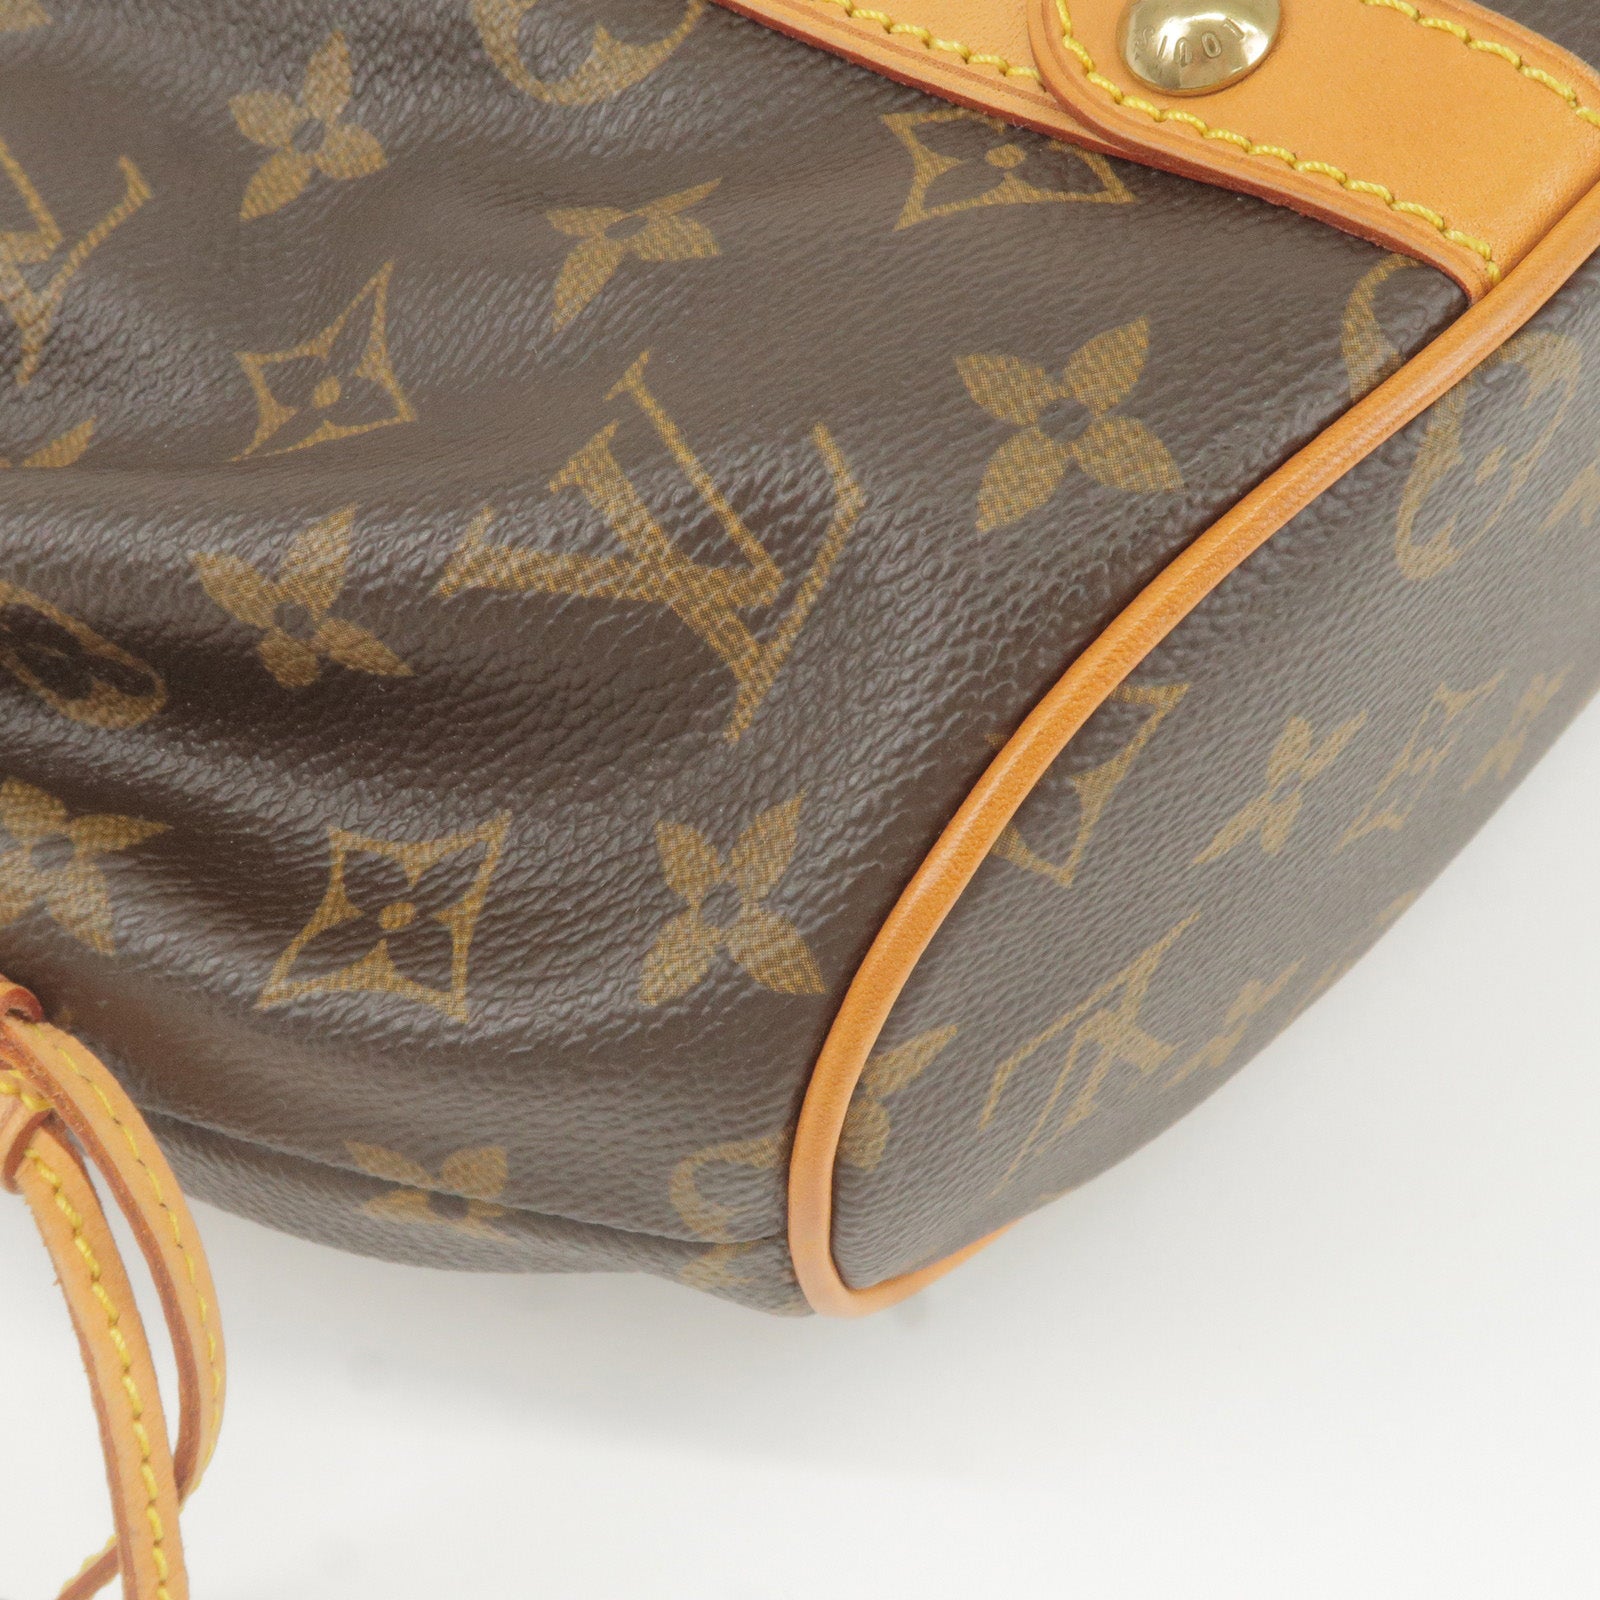 Louis - Vuitton - Theda - Hand - Bag - ep_vintage luxury Store